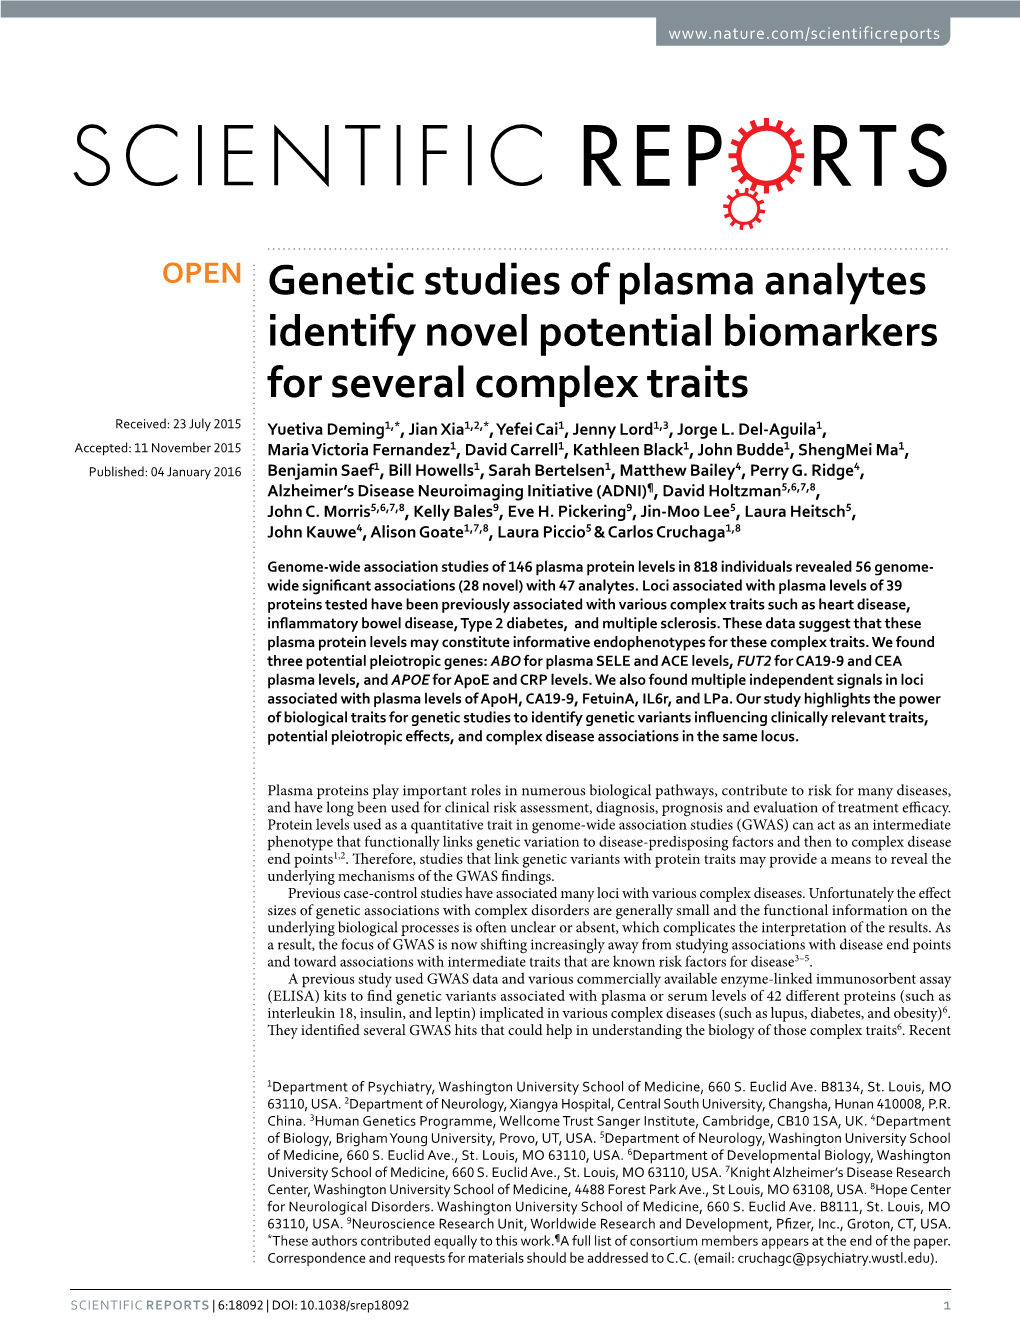 Genetic Studies of Plasma Analytes Identify Novel Potential Biomarkers for Several Complex Traits